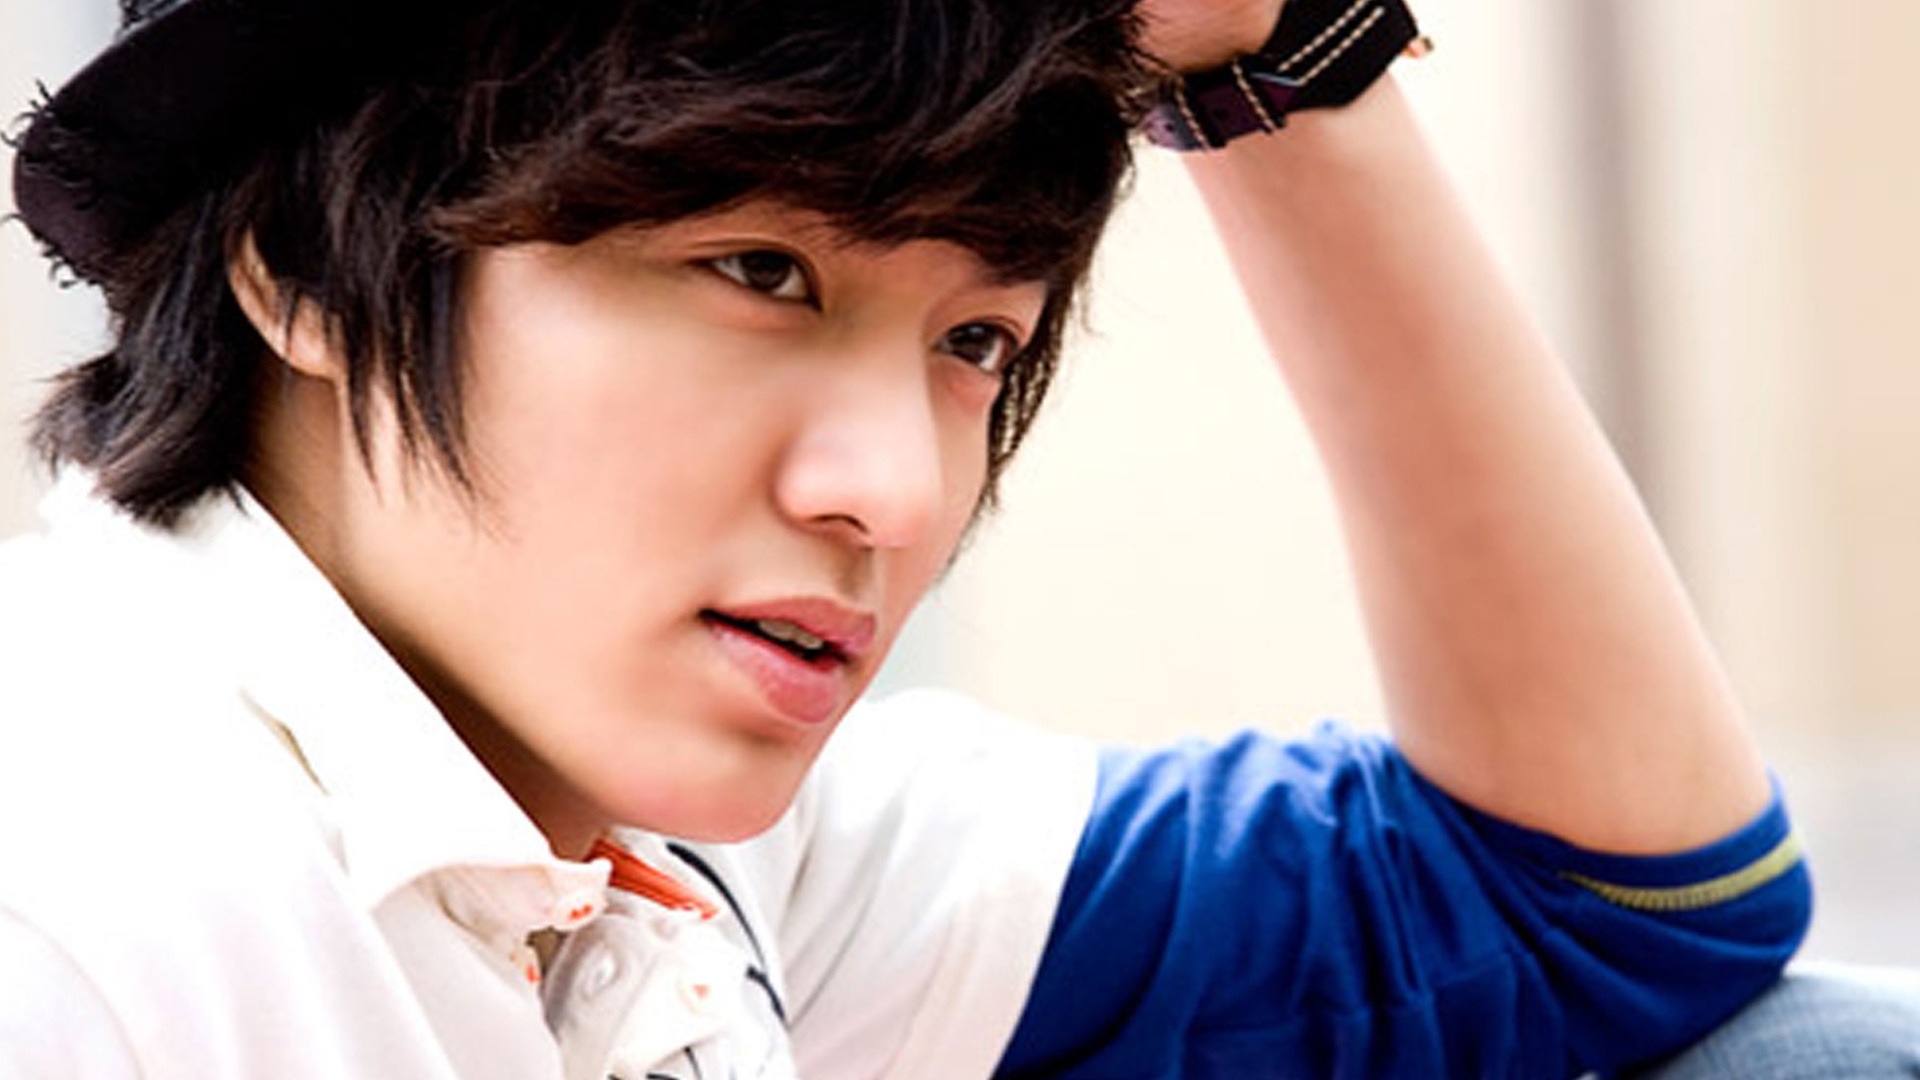 Lee Min Ho Profile Look for 1920 x 1080 HDTV 1080p resolution